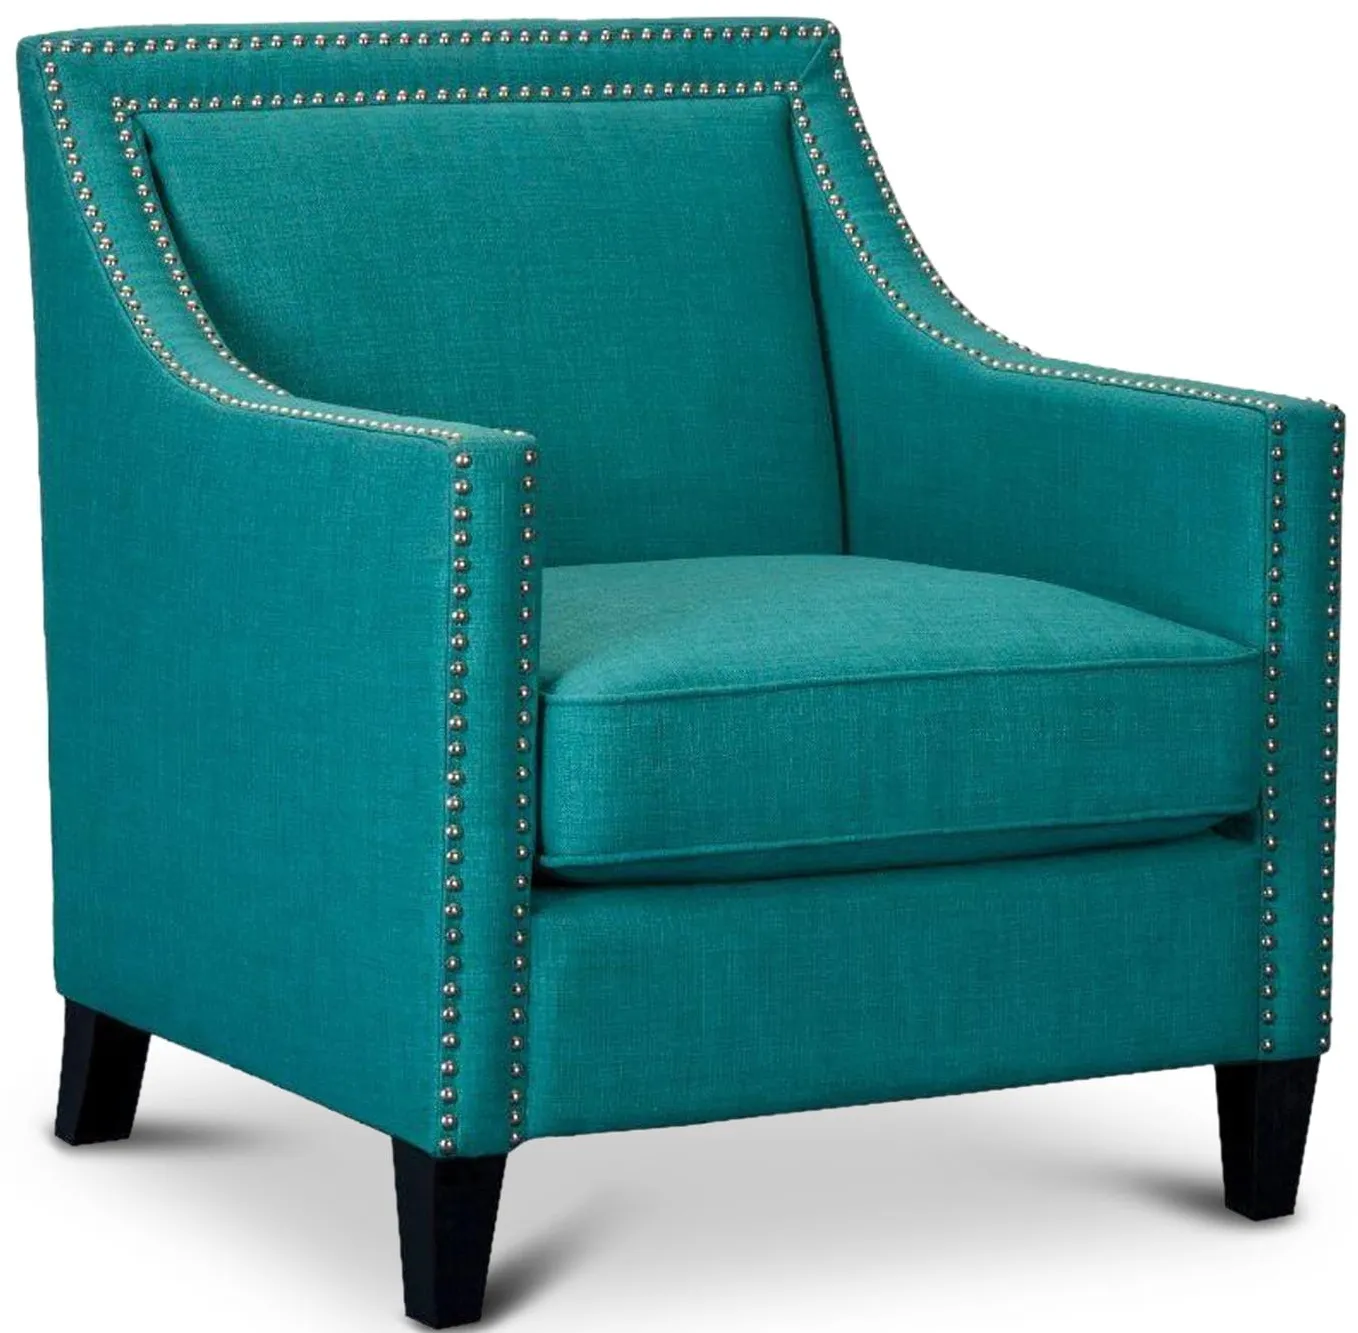 Elsinore Accent Chair